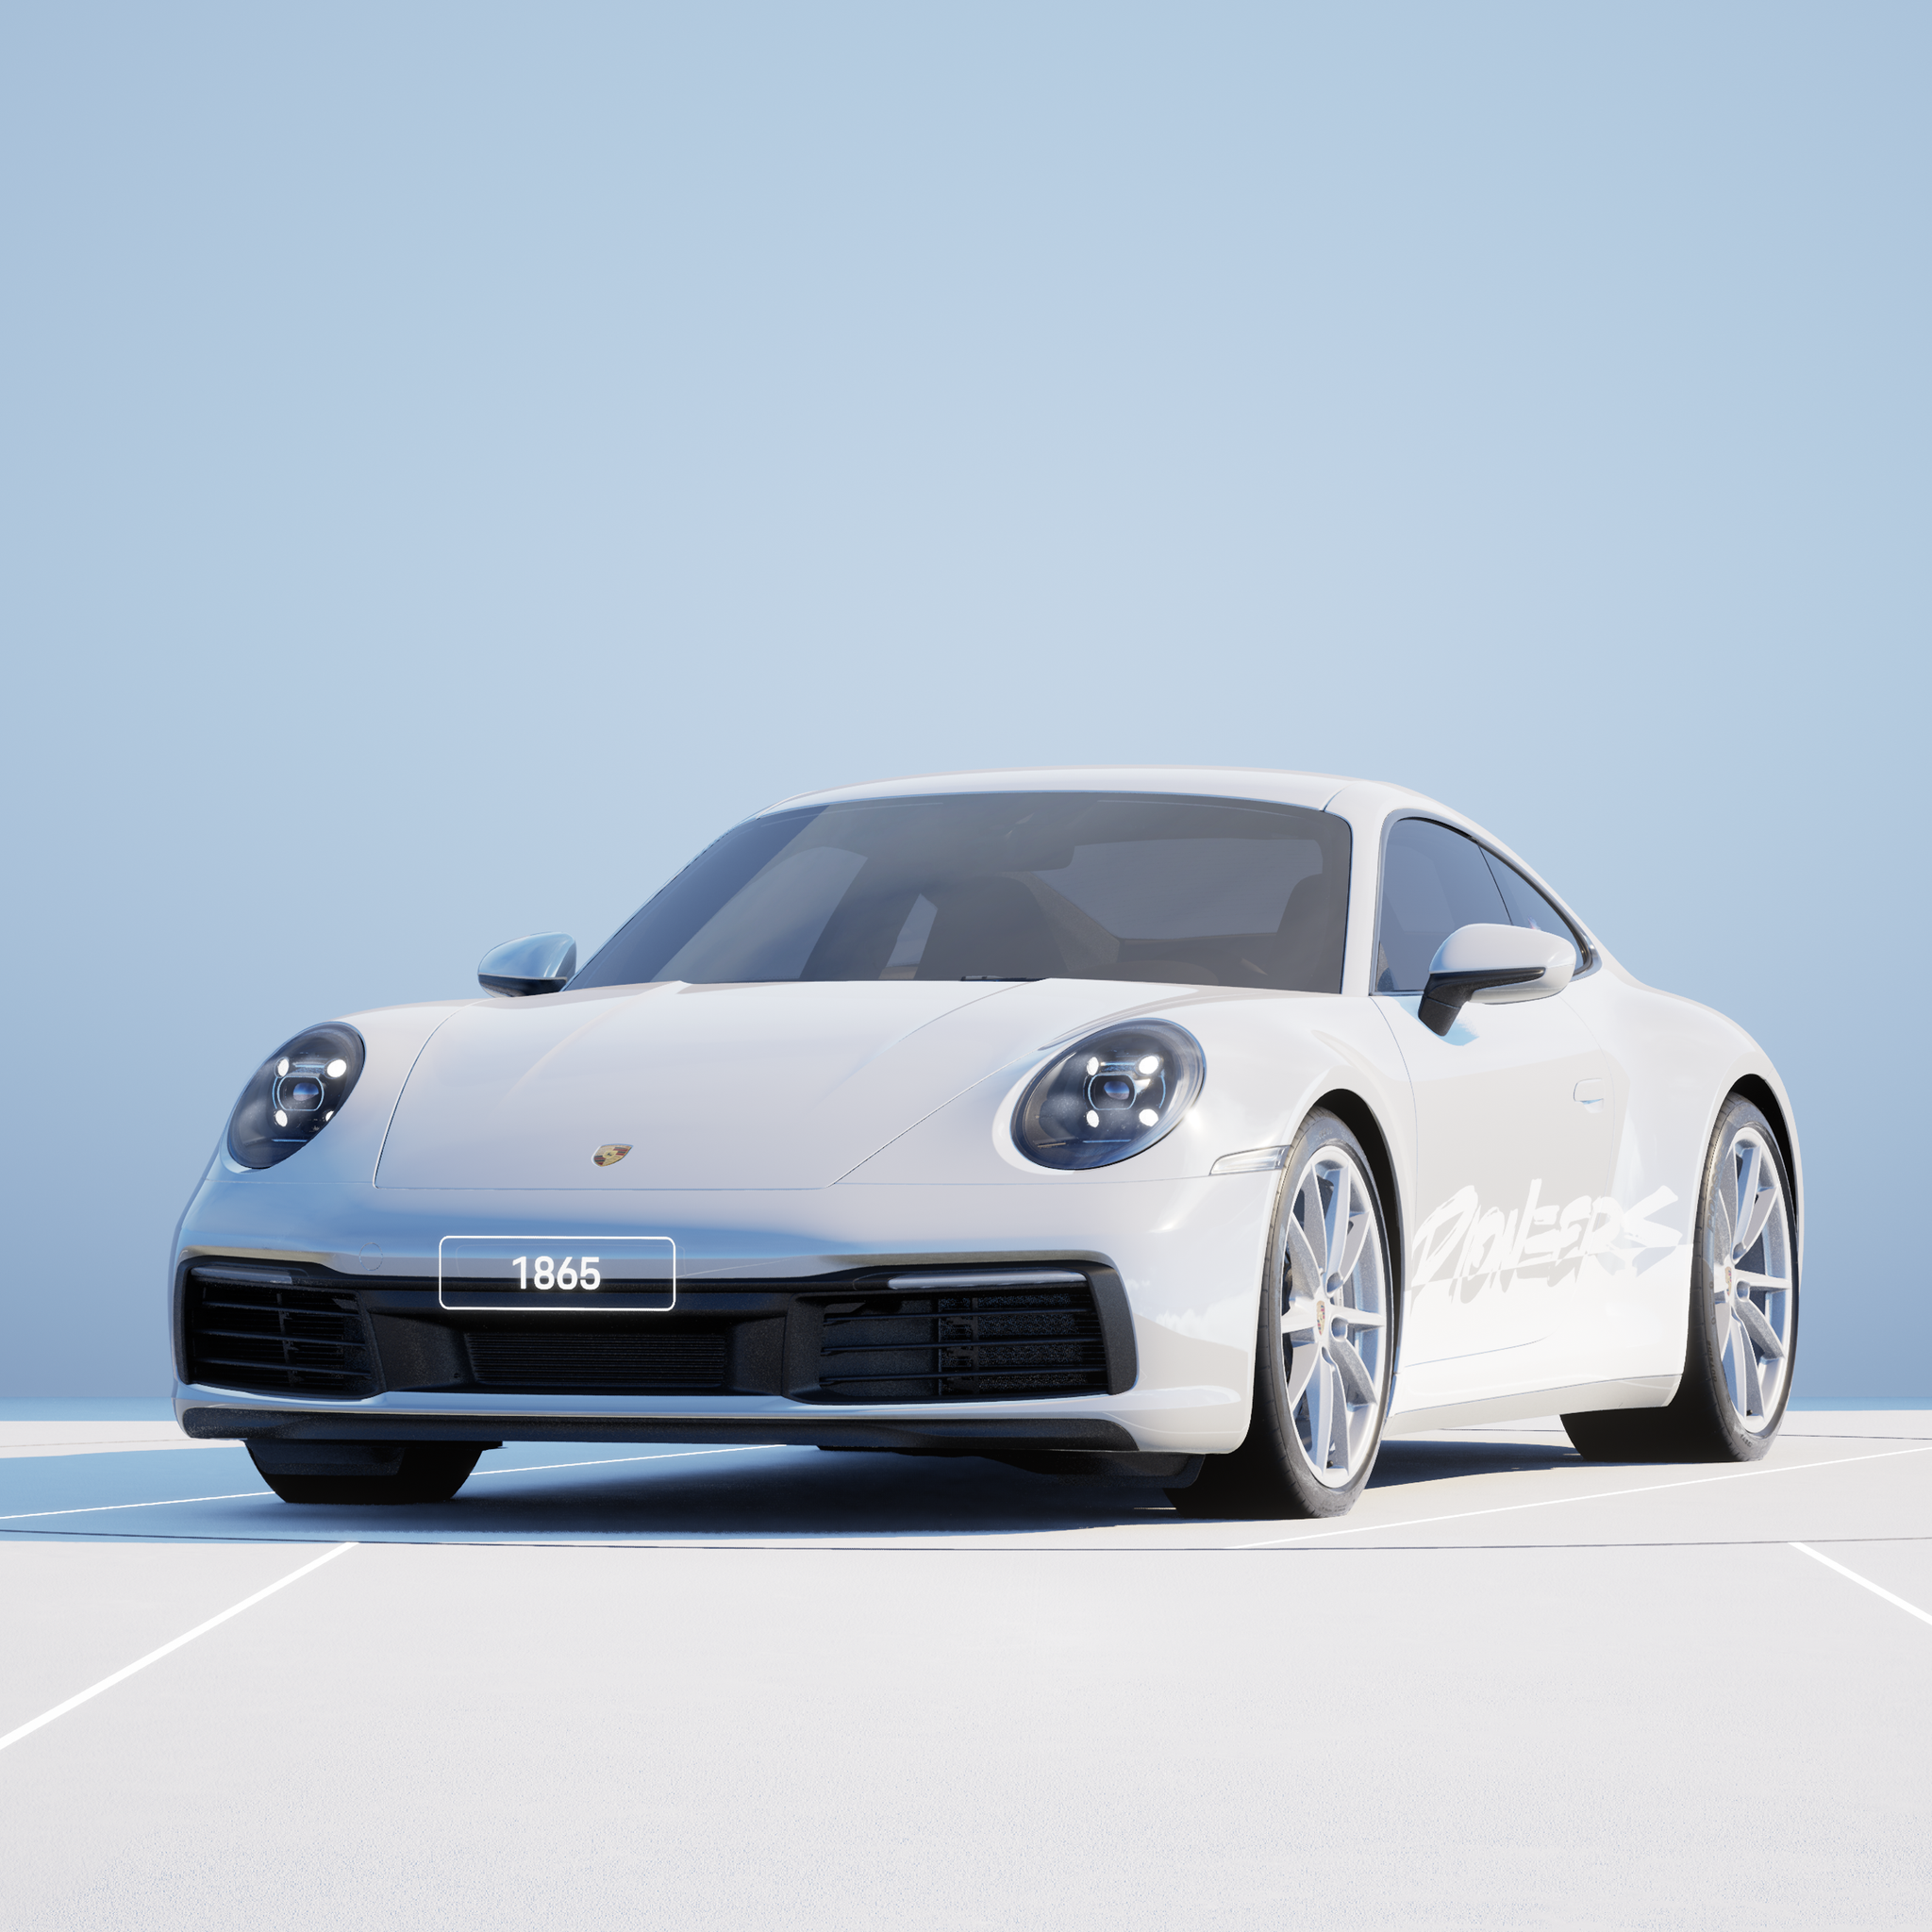 The PORSCHΞ 911 1865 image in phase